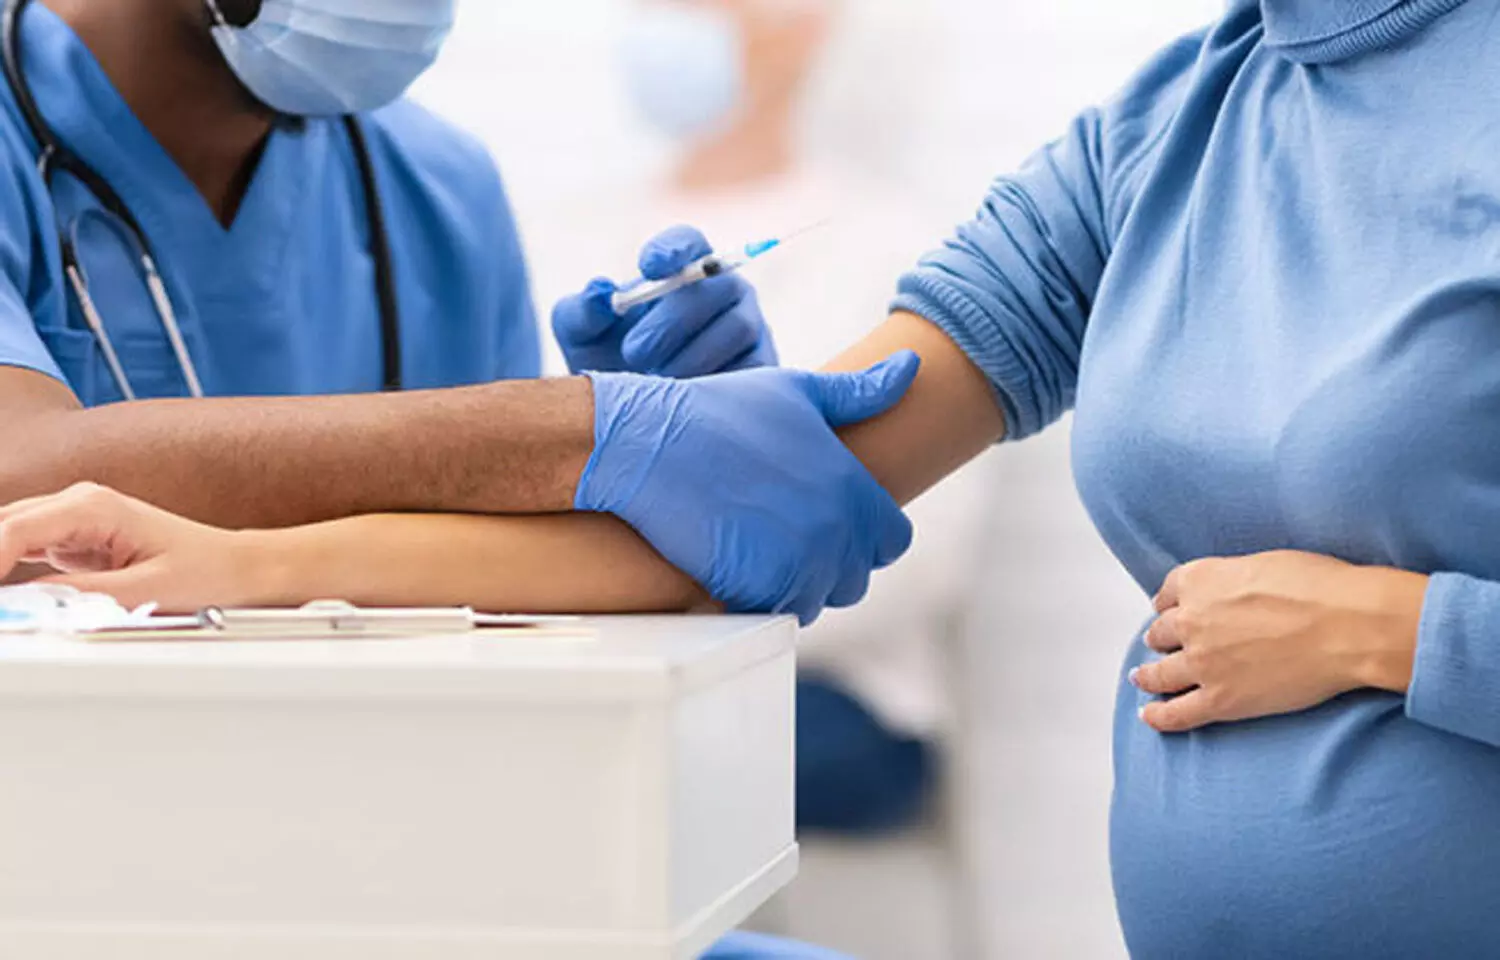 All pregnant women or those willing to conceive must receive COVID-19 vaccination: JAMA